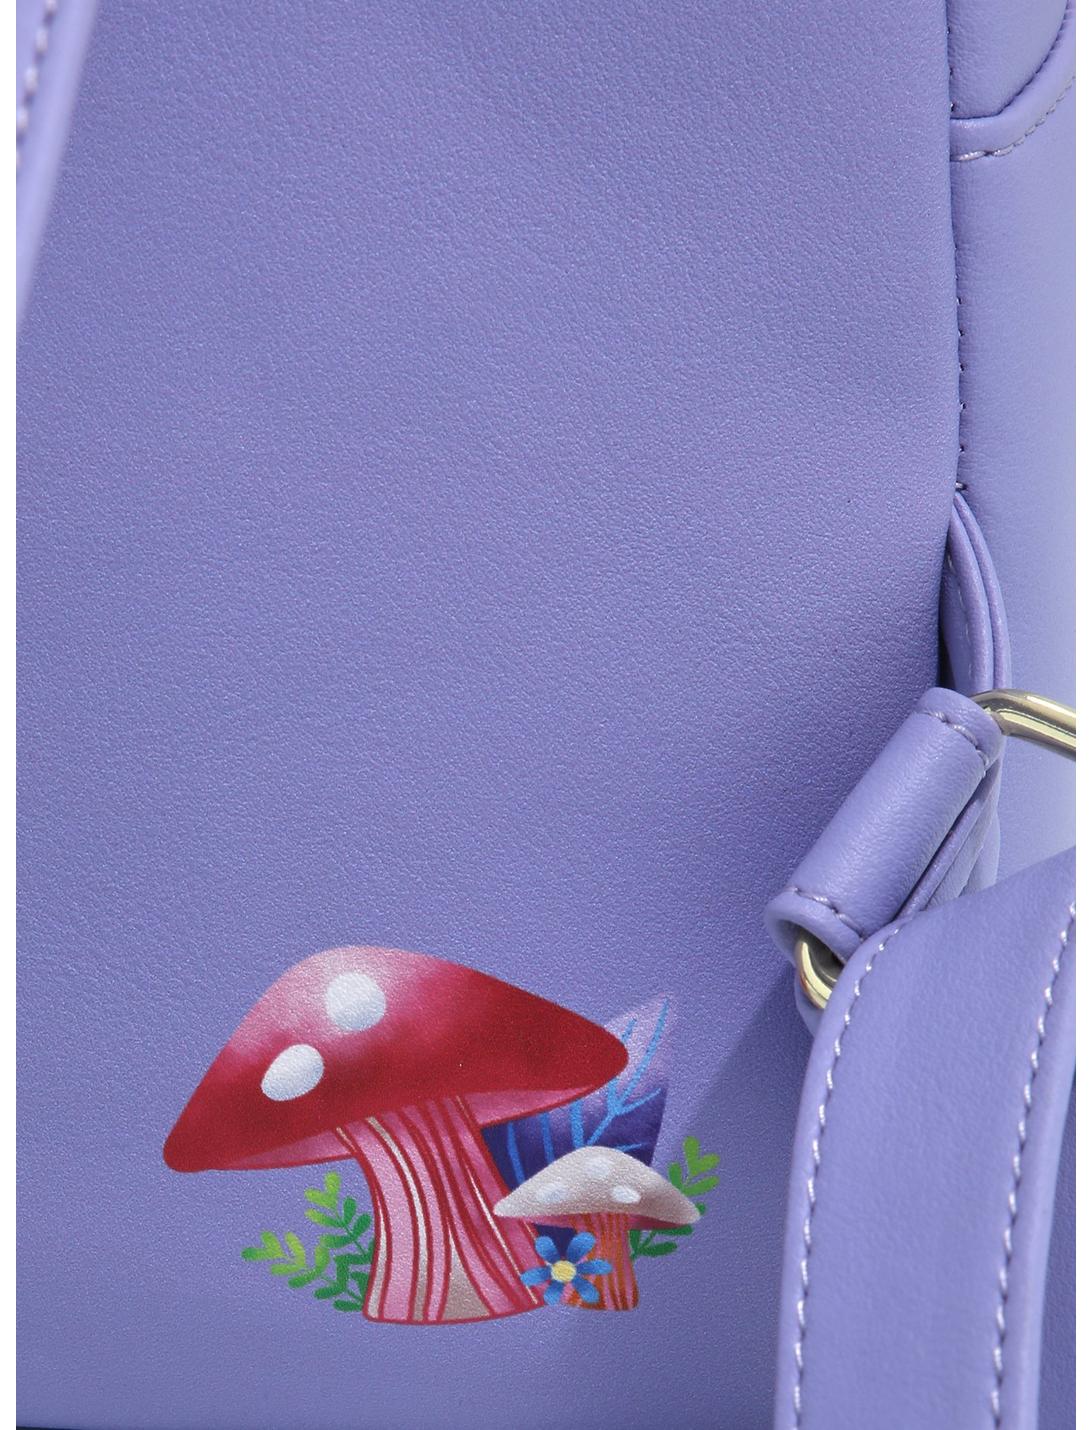 shopDisney Adds 'Alice in Wonderland' Caterpillar Loungefly Mini Backpack –  Mousesteps